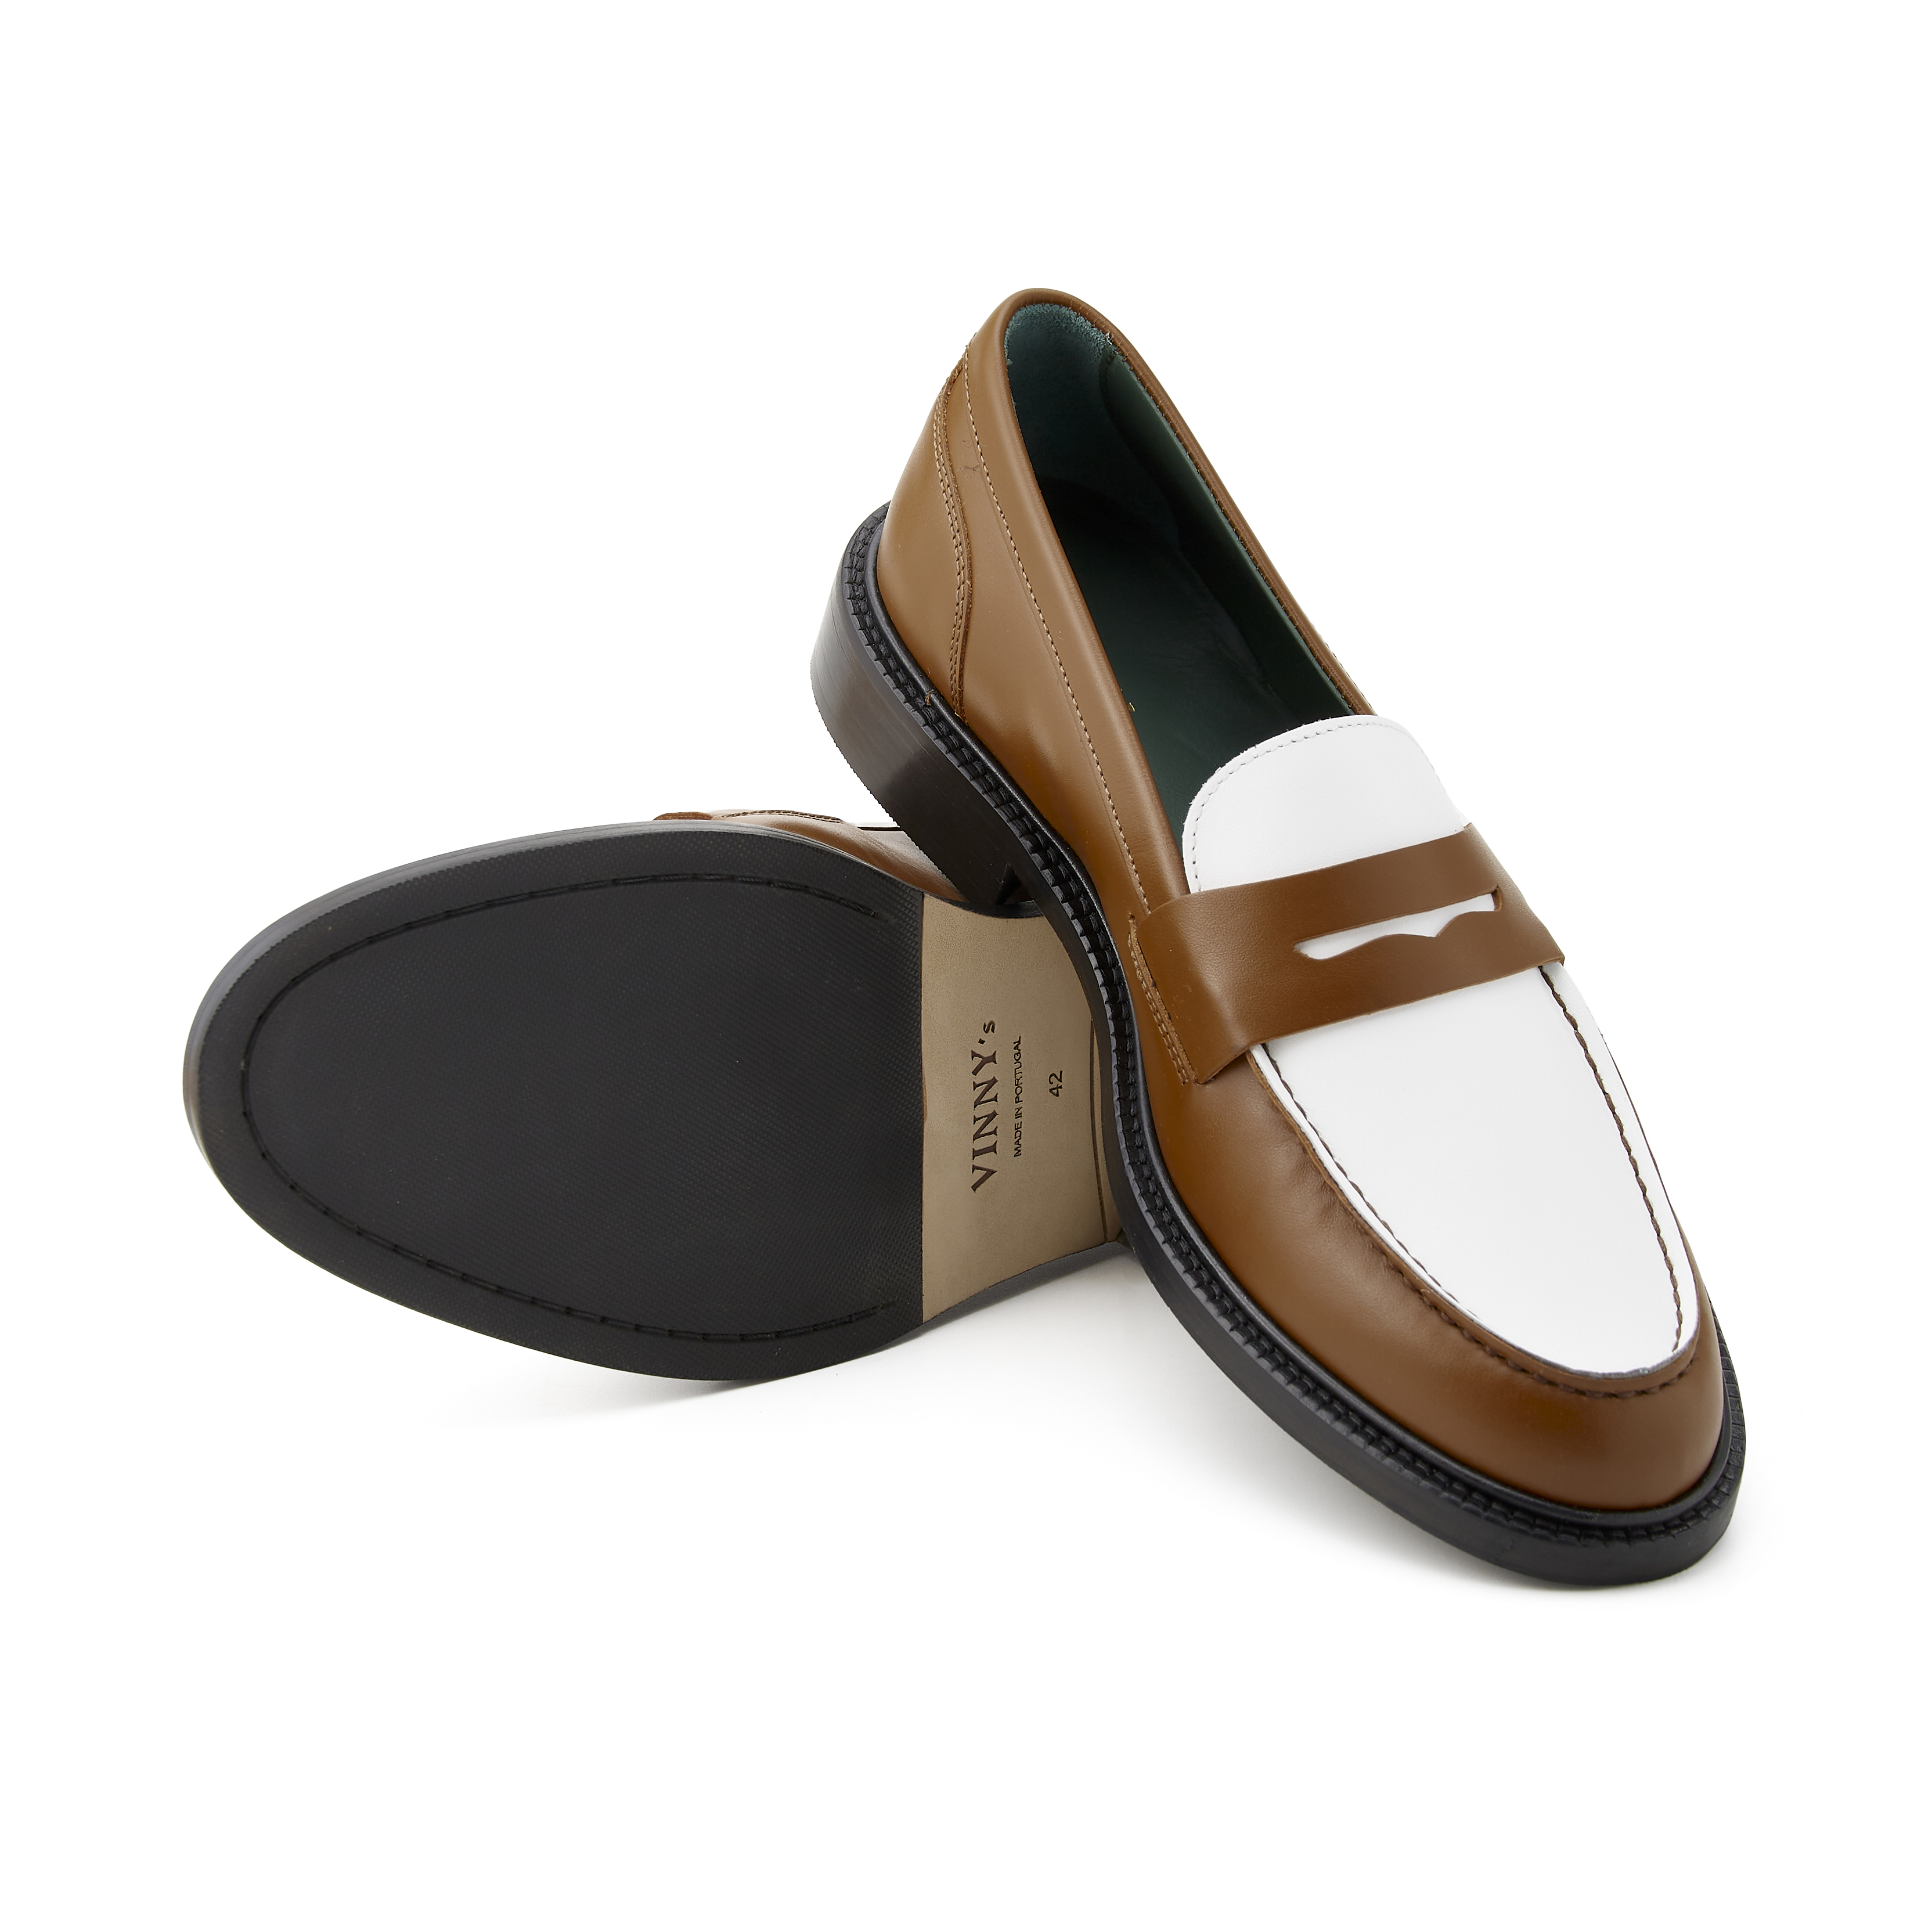 Vinny's Townee Two-Tone Penny Loafer - Cognac Leather | Loafers ...